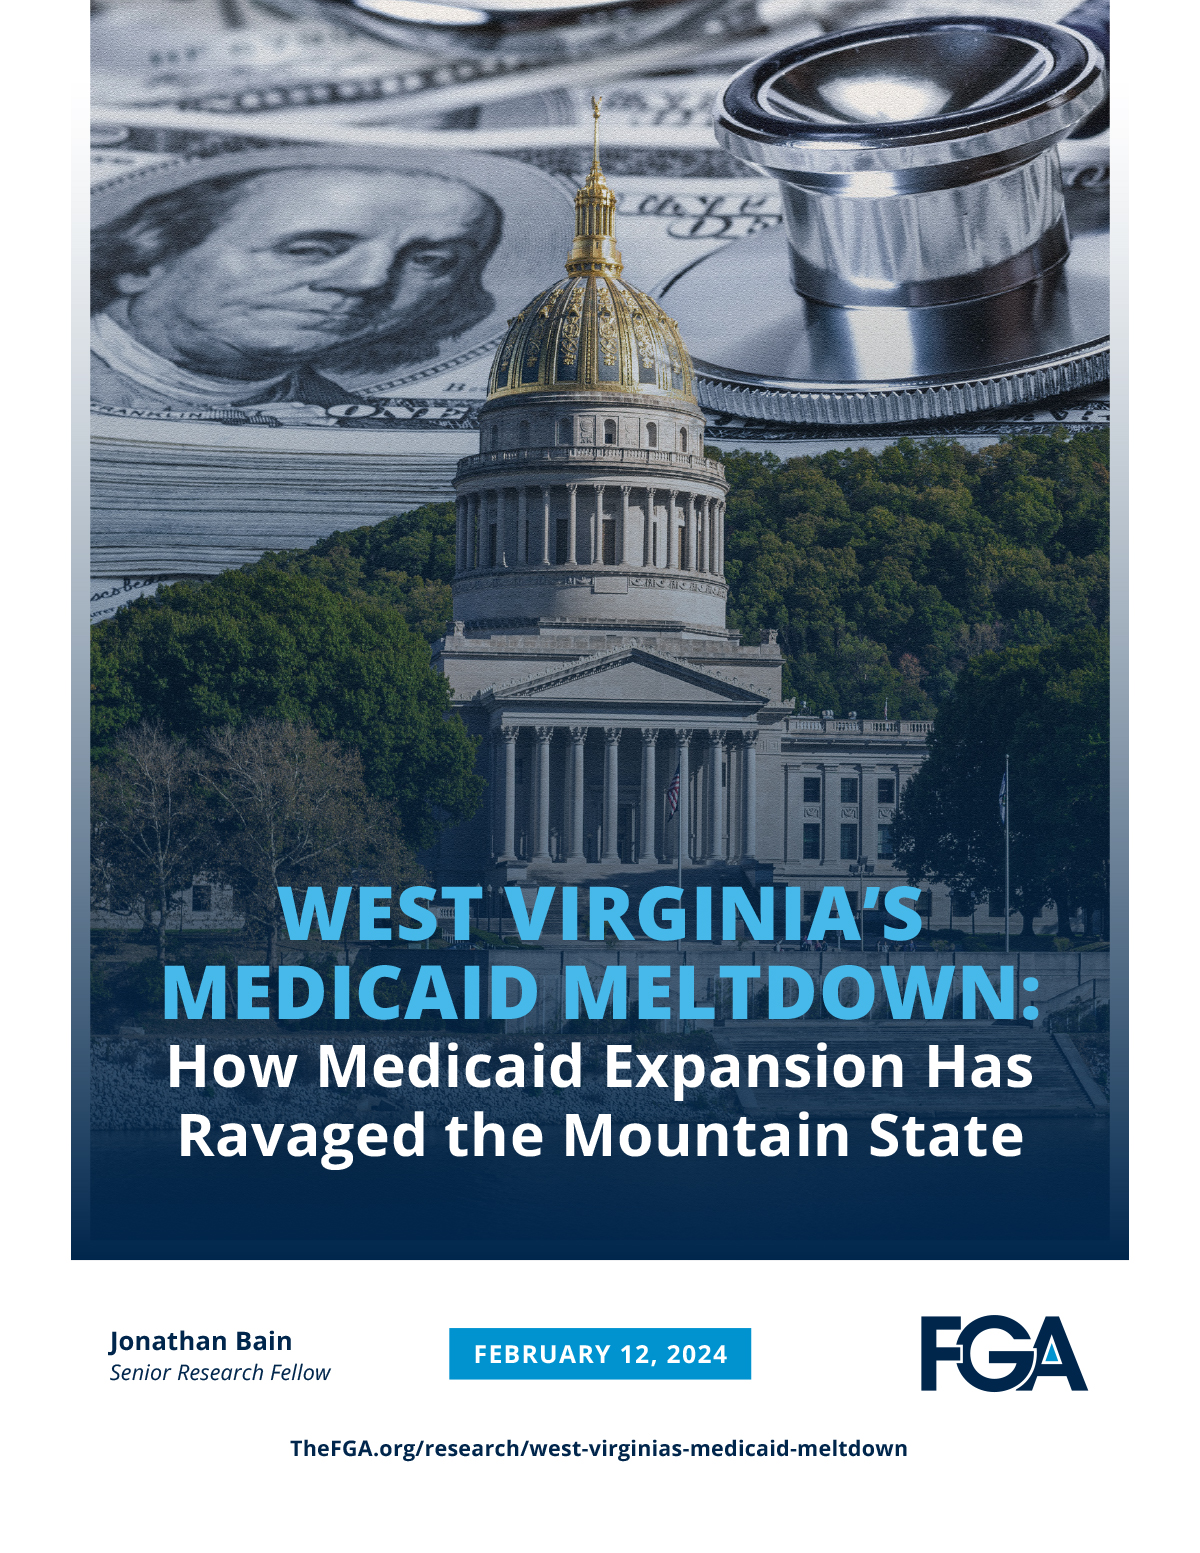 West Virginia’s Medicaid Meltdown: How Medicaid Expansion Has Ravaged the Mountain State